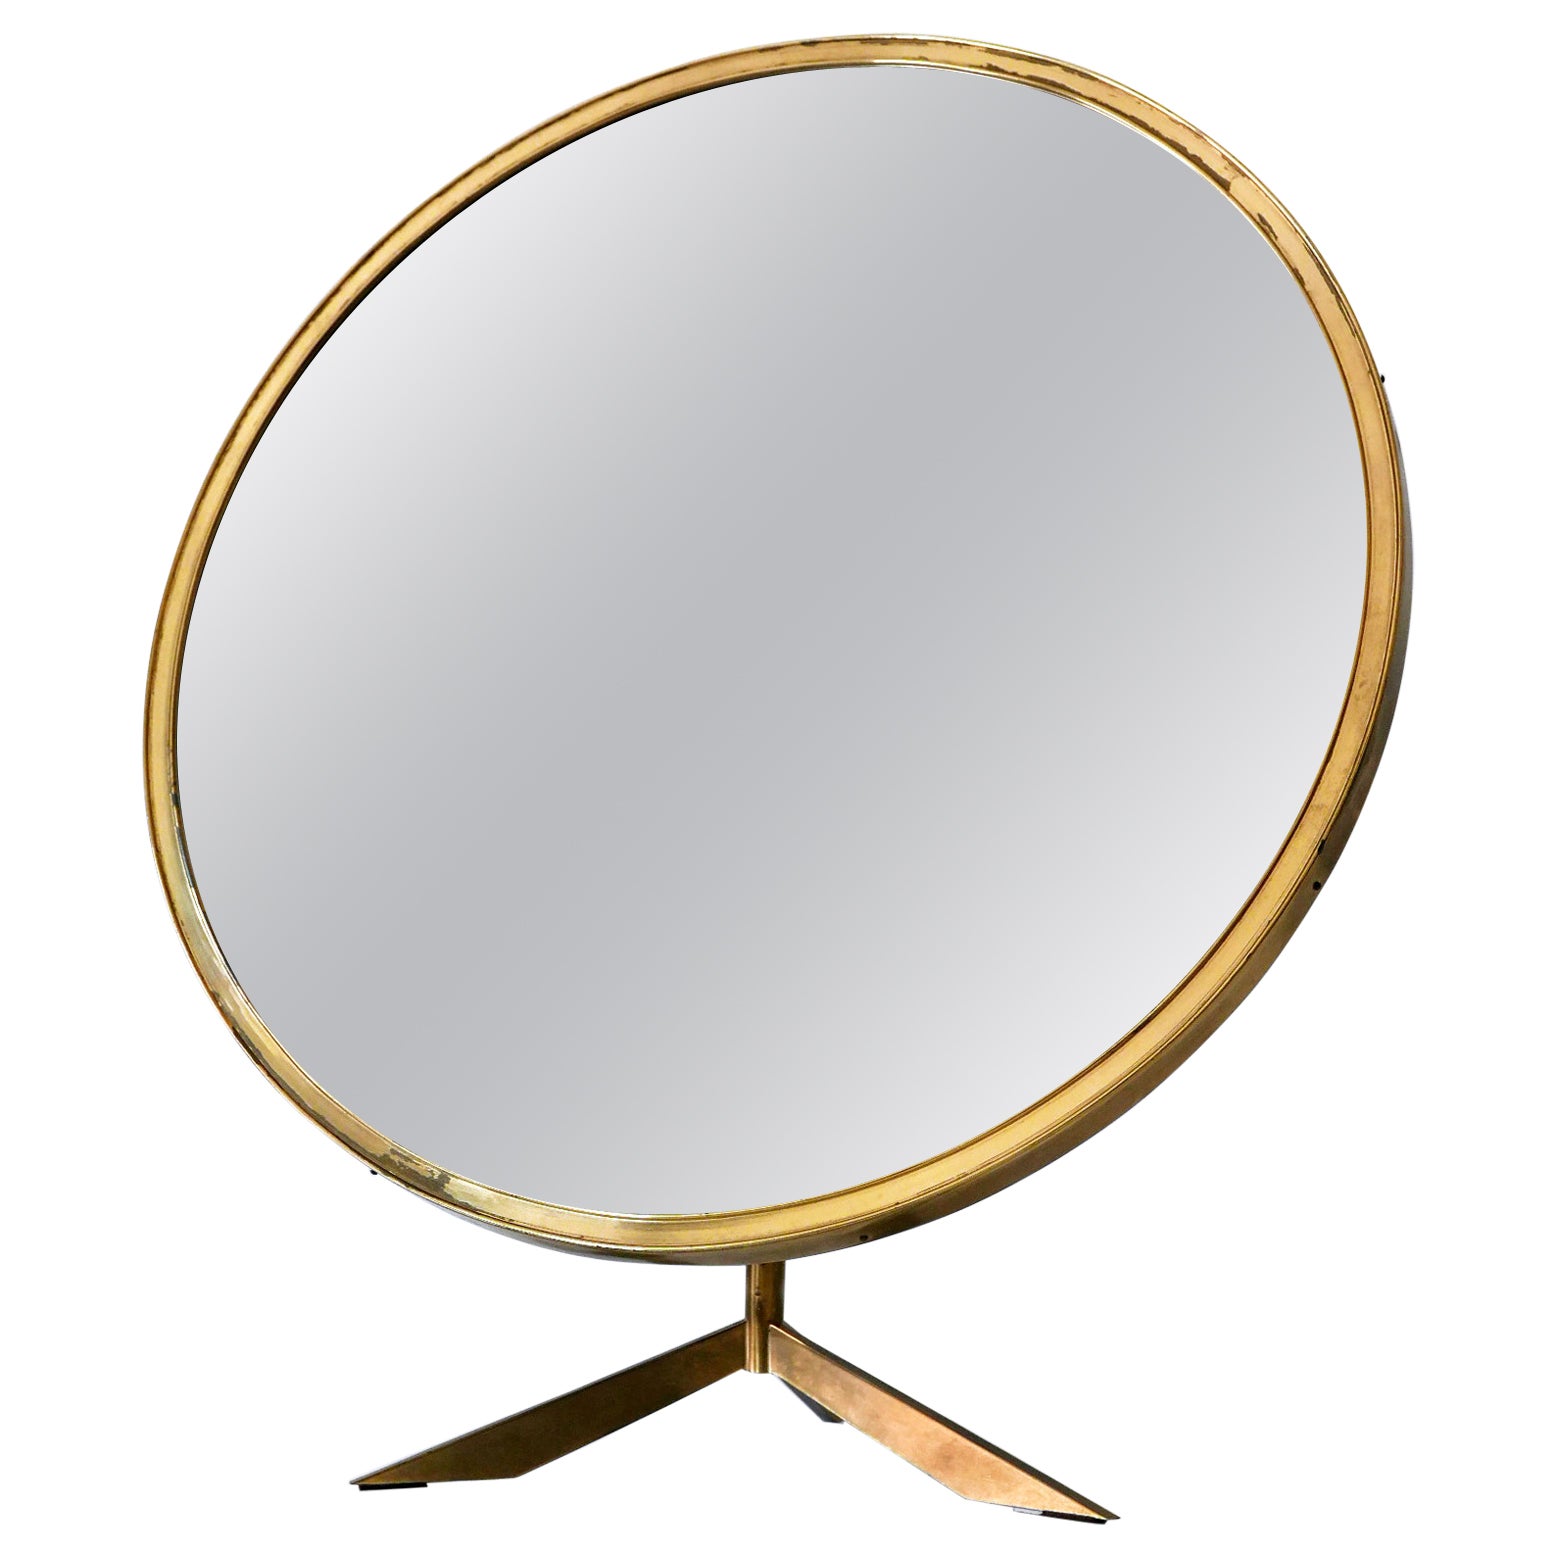 Elegant Mid-Century Modern Wall or Vanity Mirror by Zierform Germany 1950s For Sale